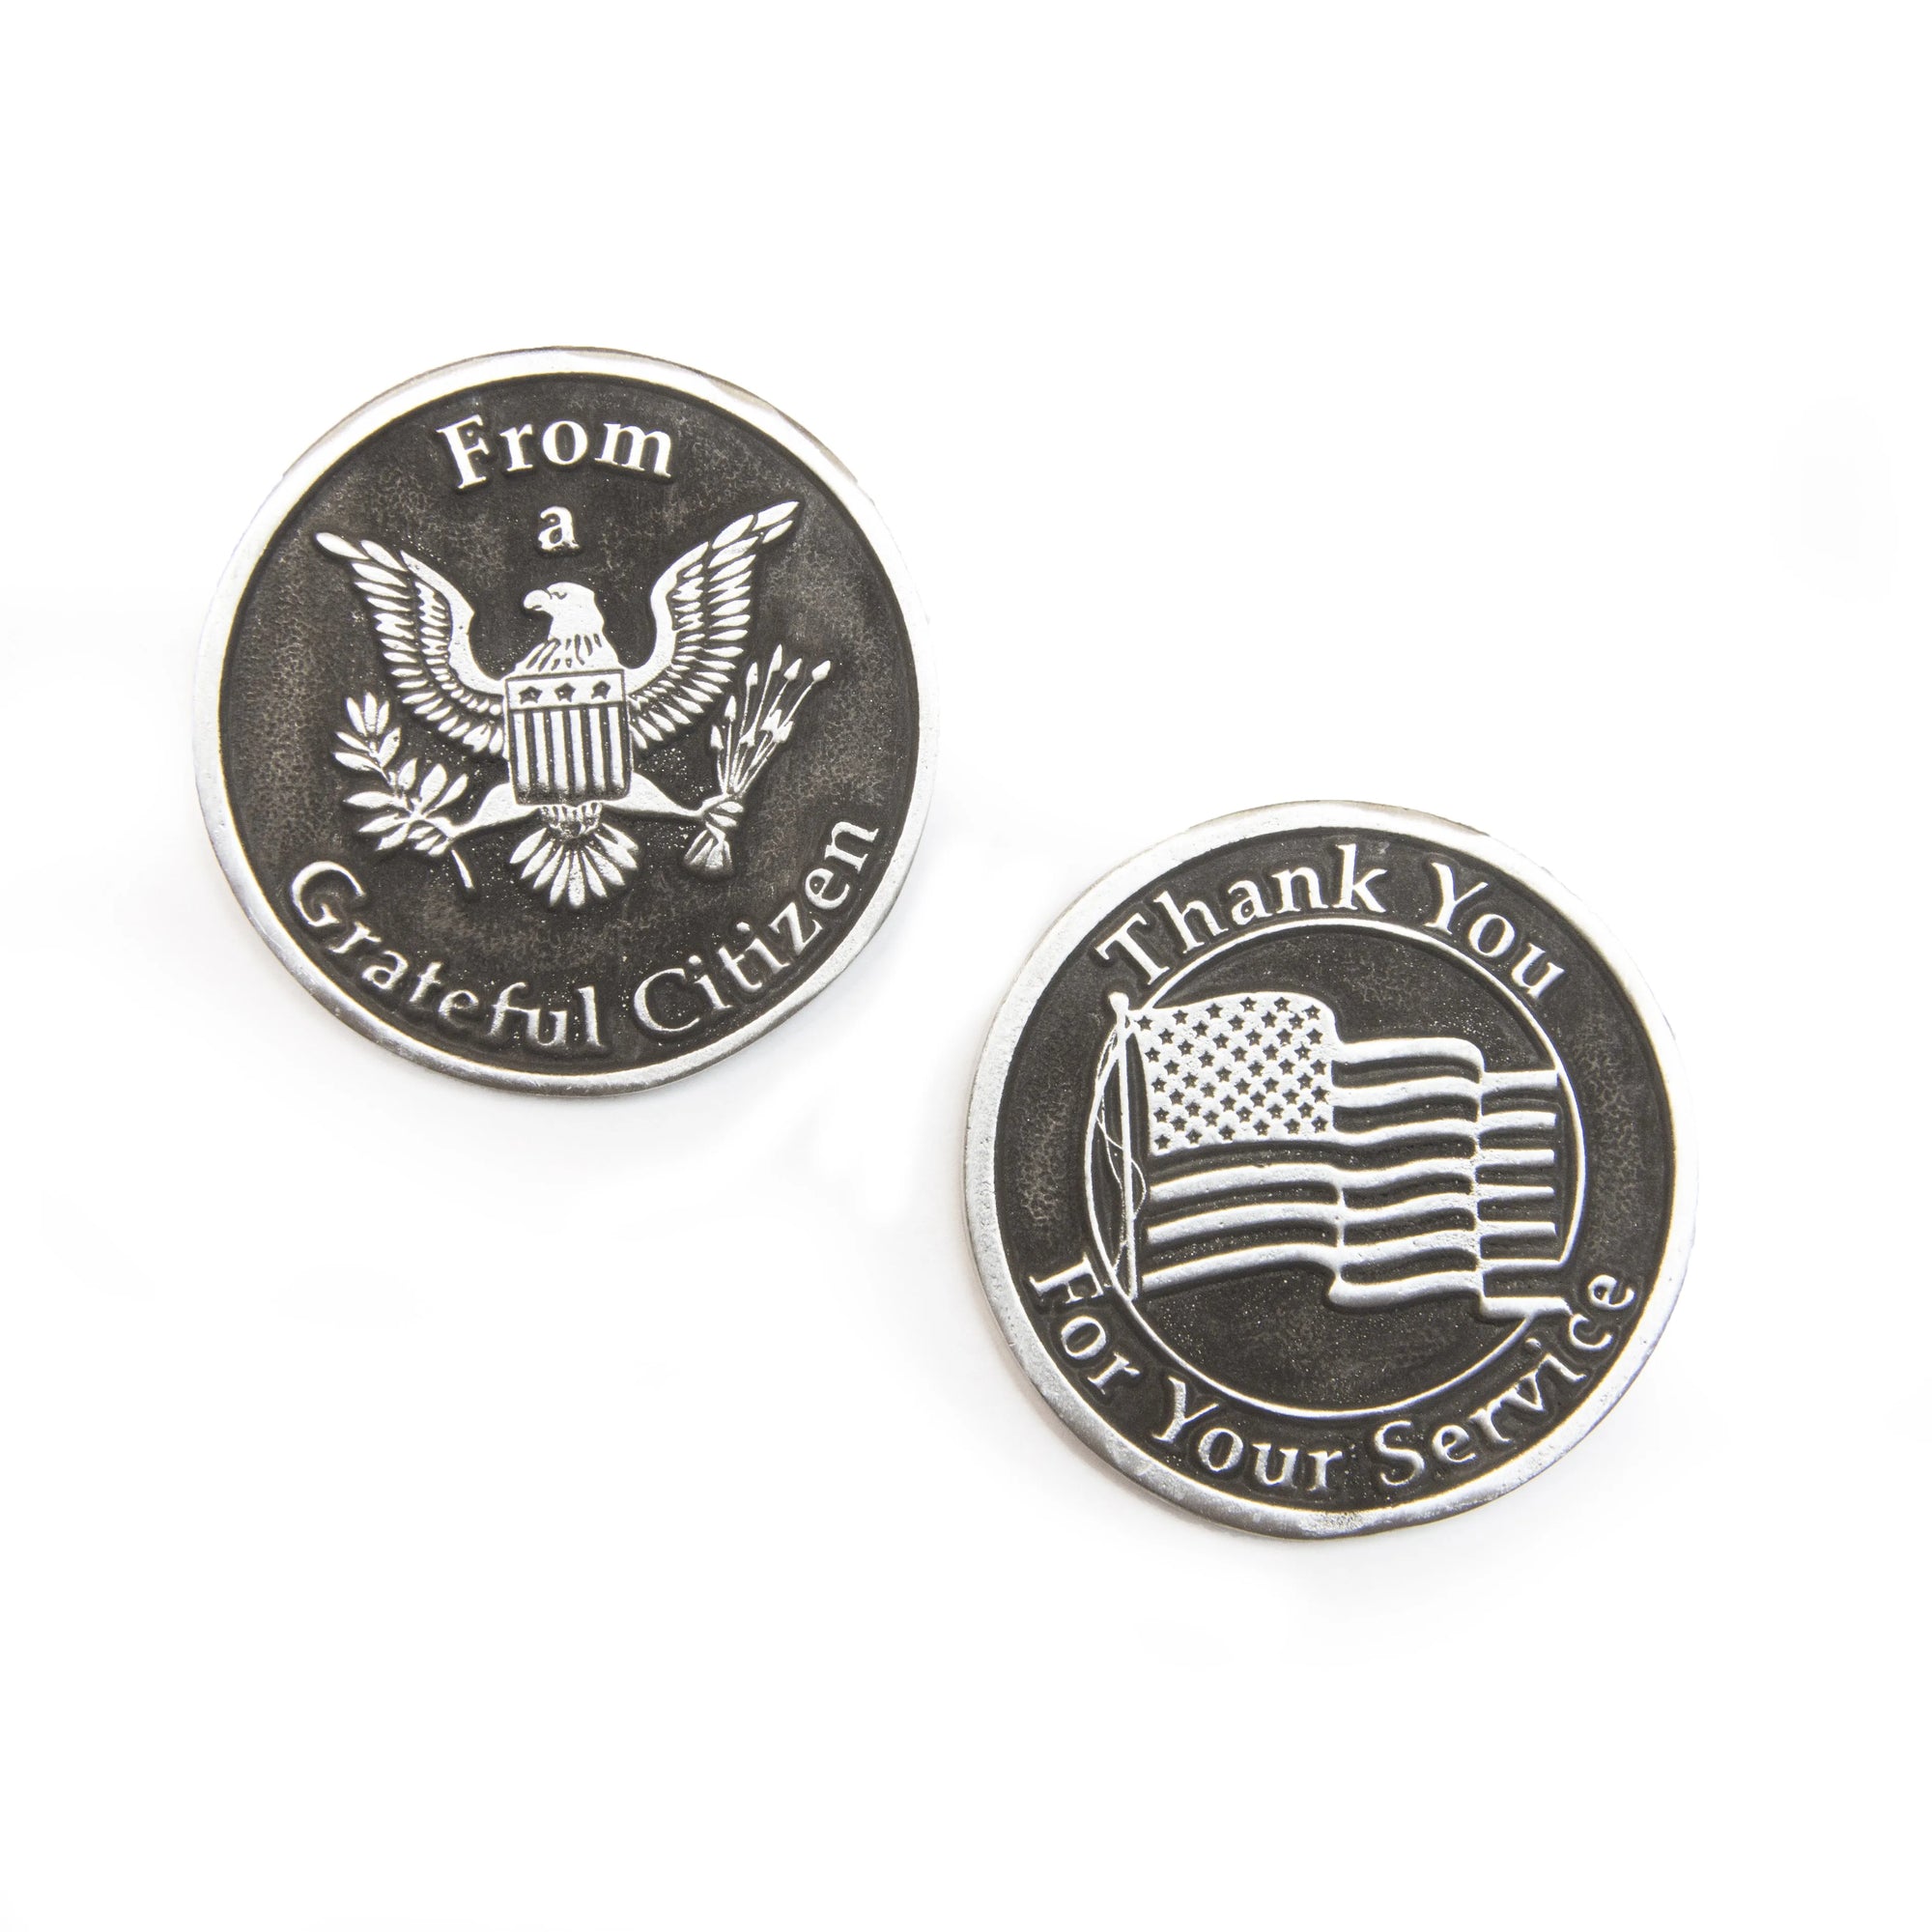 Grateful Citizen to a Veteran Coin Western Heritage Company